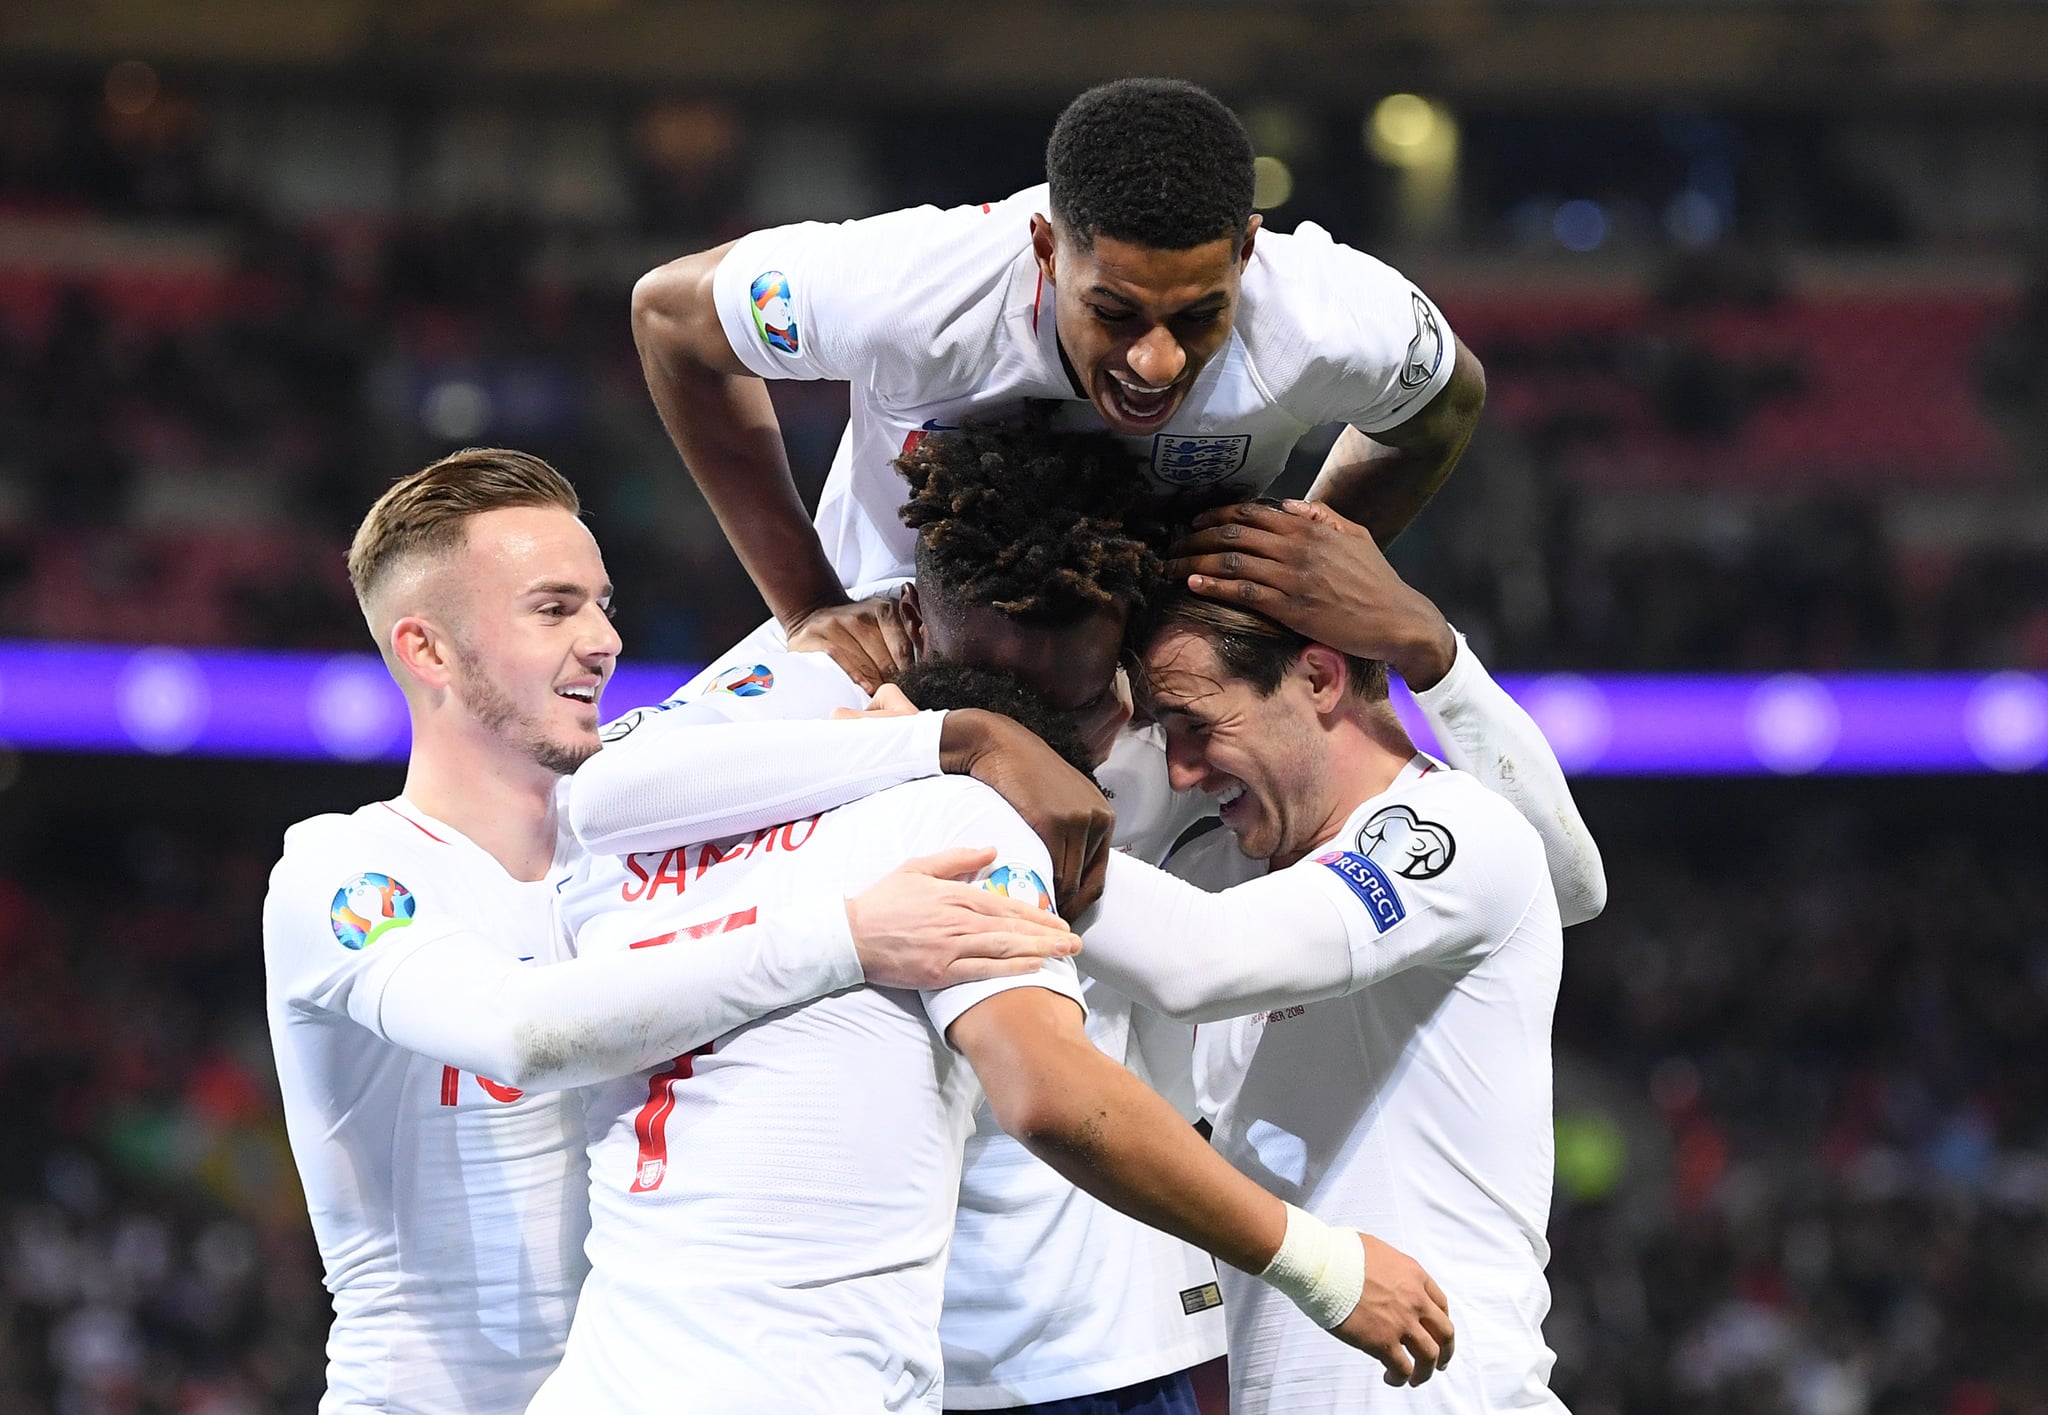 LONDON, ENGLAND - NOVEMBER 14: Tammy Abraham of England celebrates after scoring his sides seventh goal with team mates during the UEFA Euro 2020 qualifier between England and Montenegro at Wembley Stadium on November 14, 2019 in London, England. (Photo by Michael Regan/Getty Images)